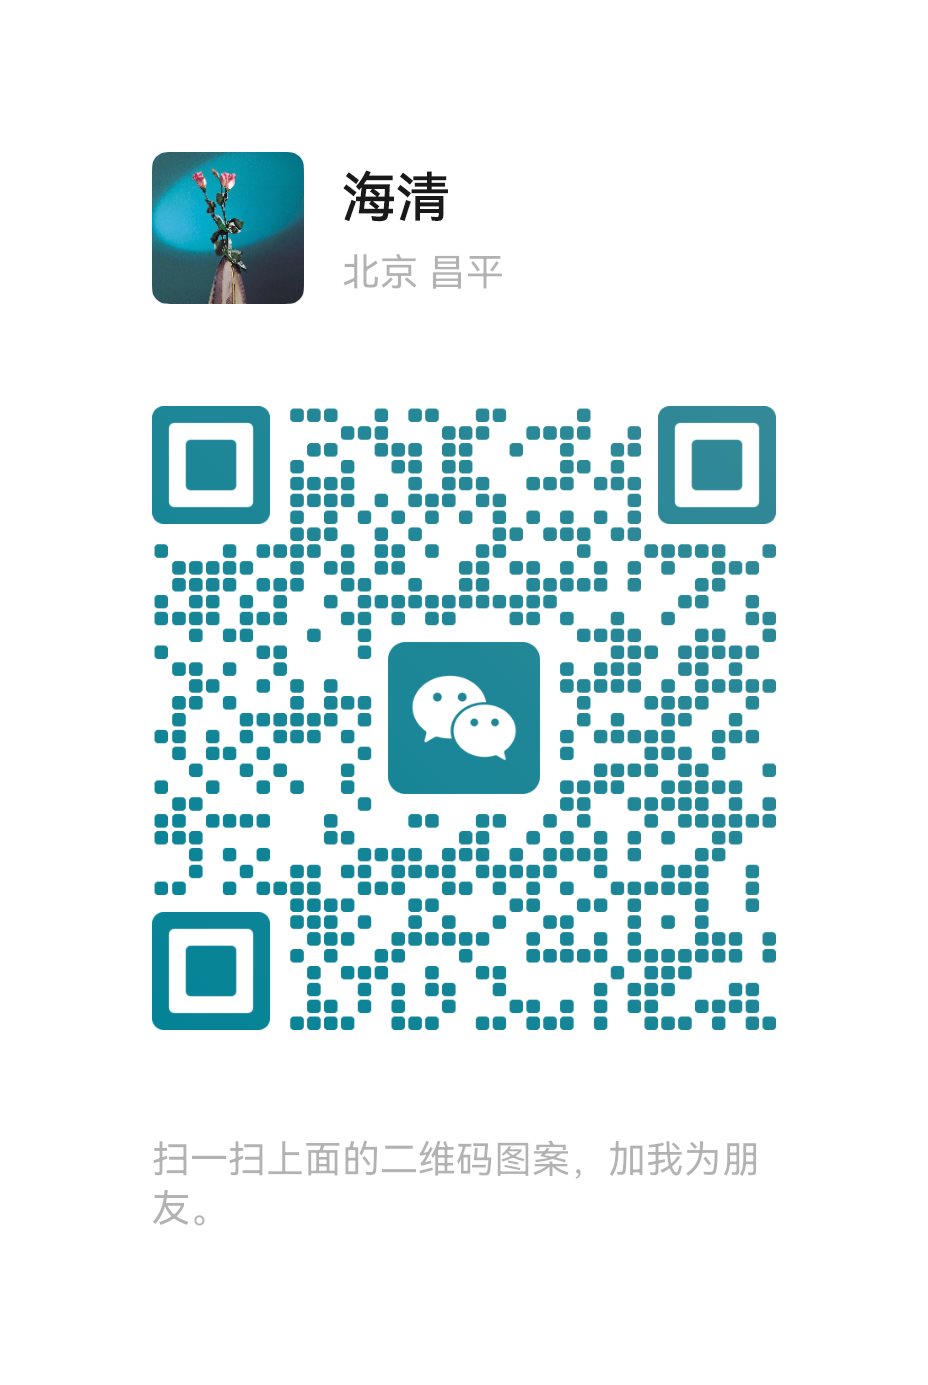 mmqrcode1705199189030.png